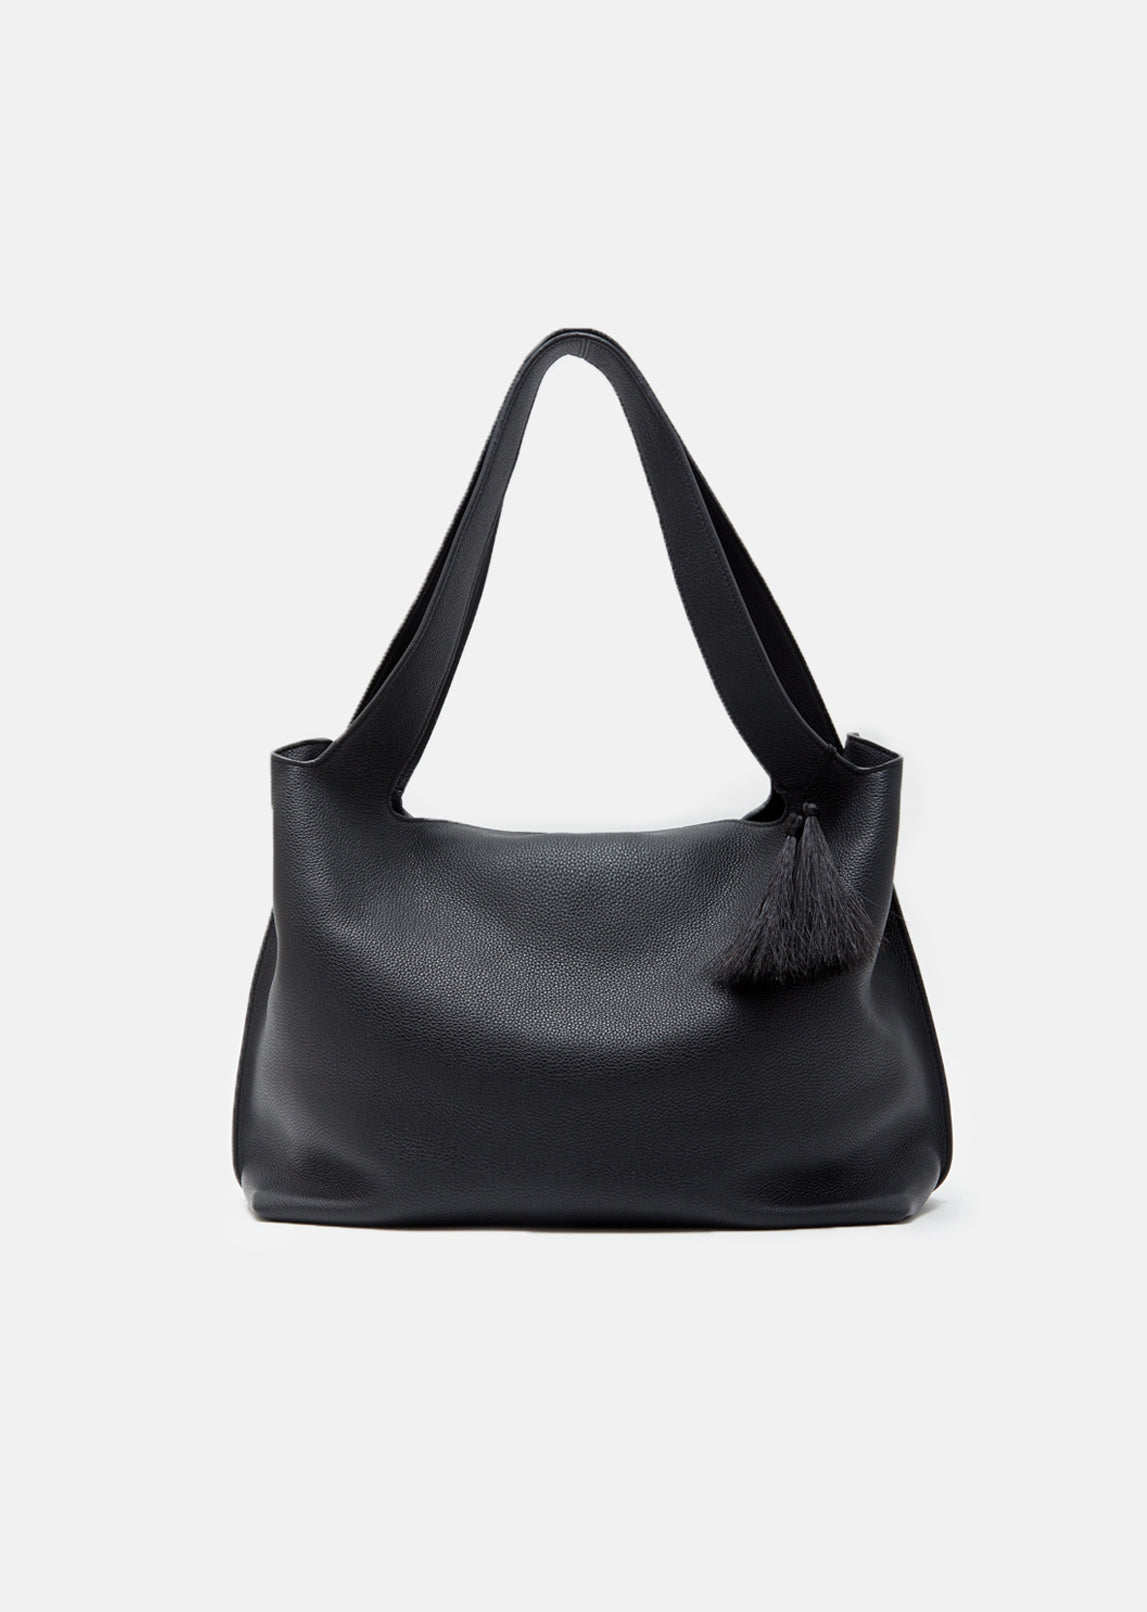 Bag lover shoppe - Spotted LC Neo Small size in Graphite (dark